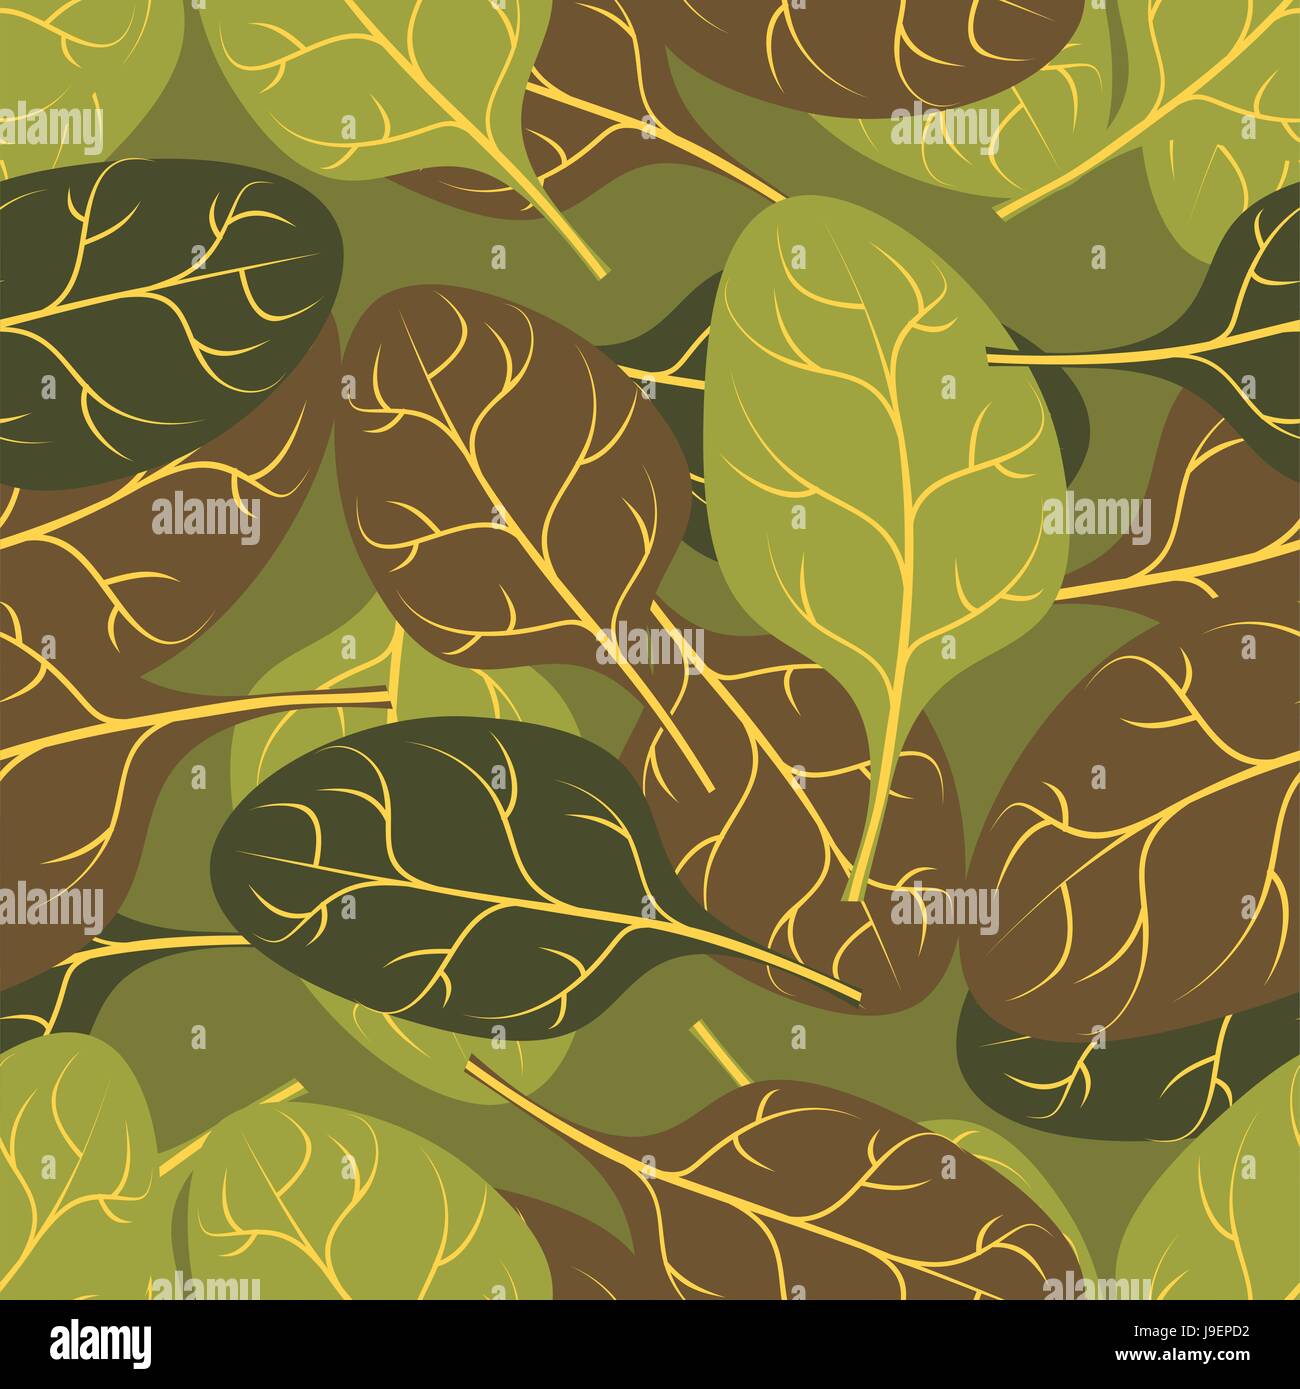 Military texture of  leaves Spinach. Camouflage army seamless pattern of foliage plants. Stock Vector